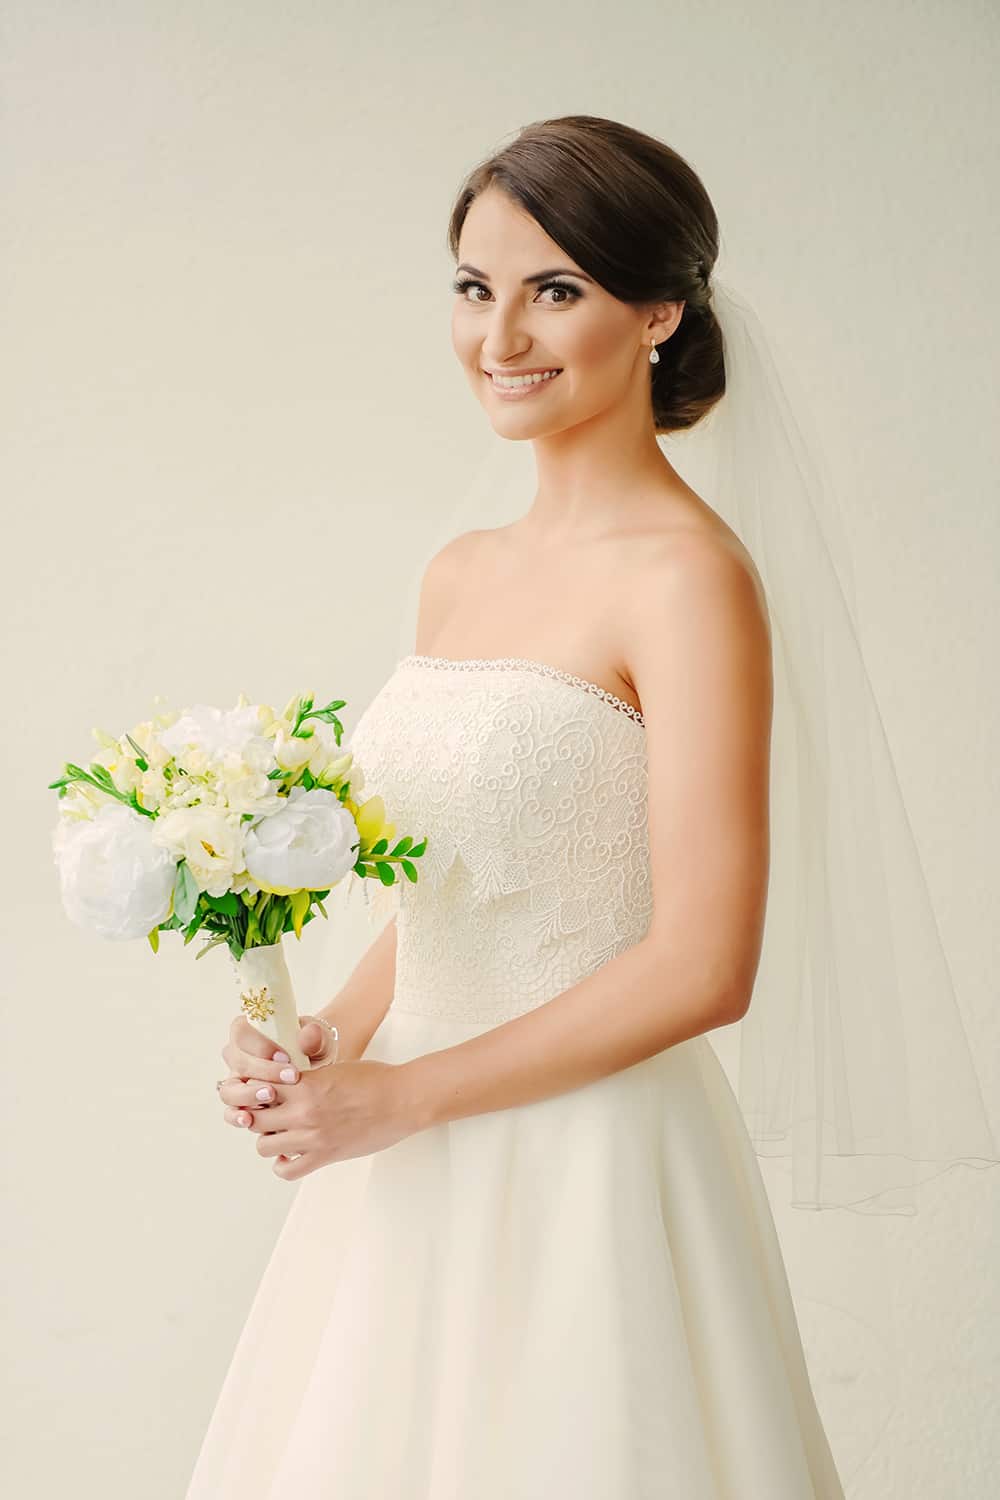 Real bride Lucy with her yellow, white and green bouquet. Photo: Evernew Studio